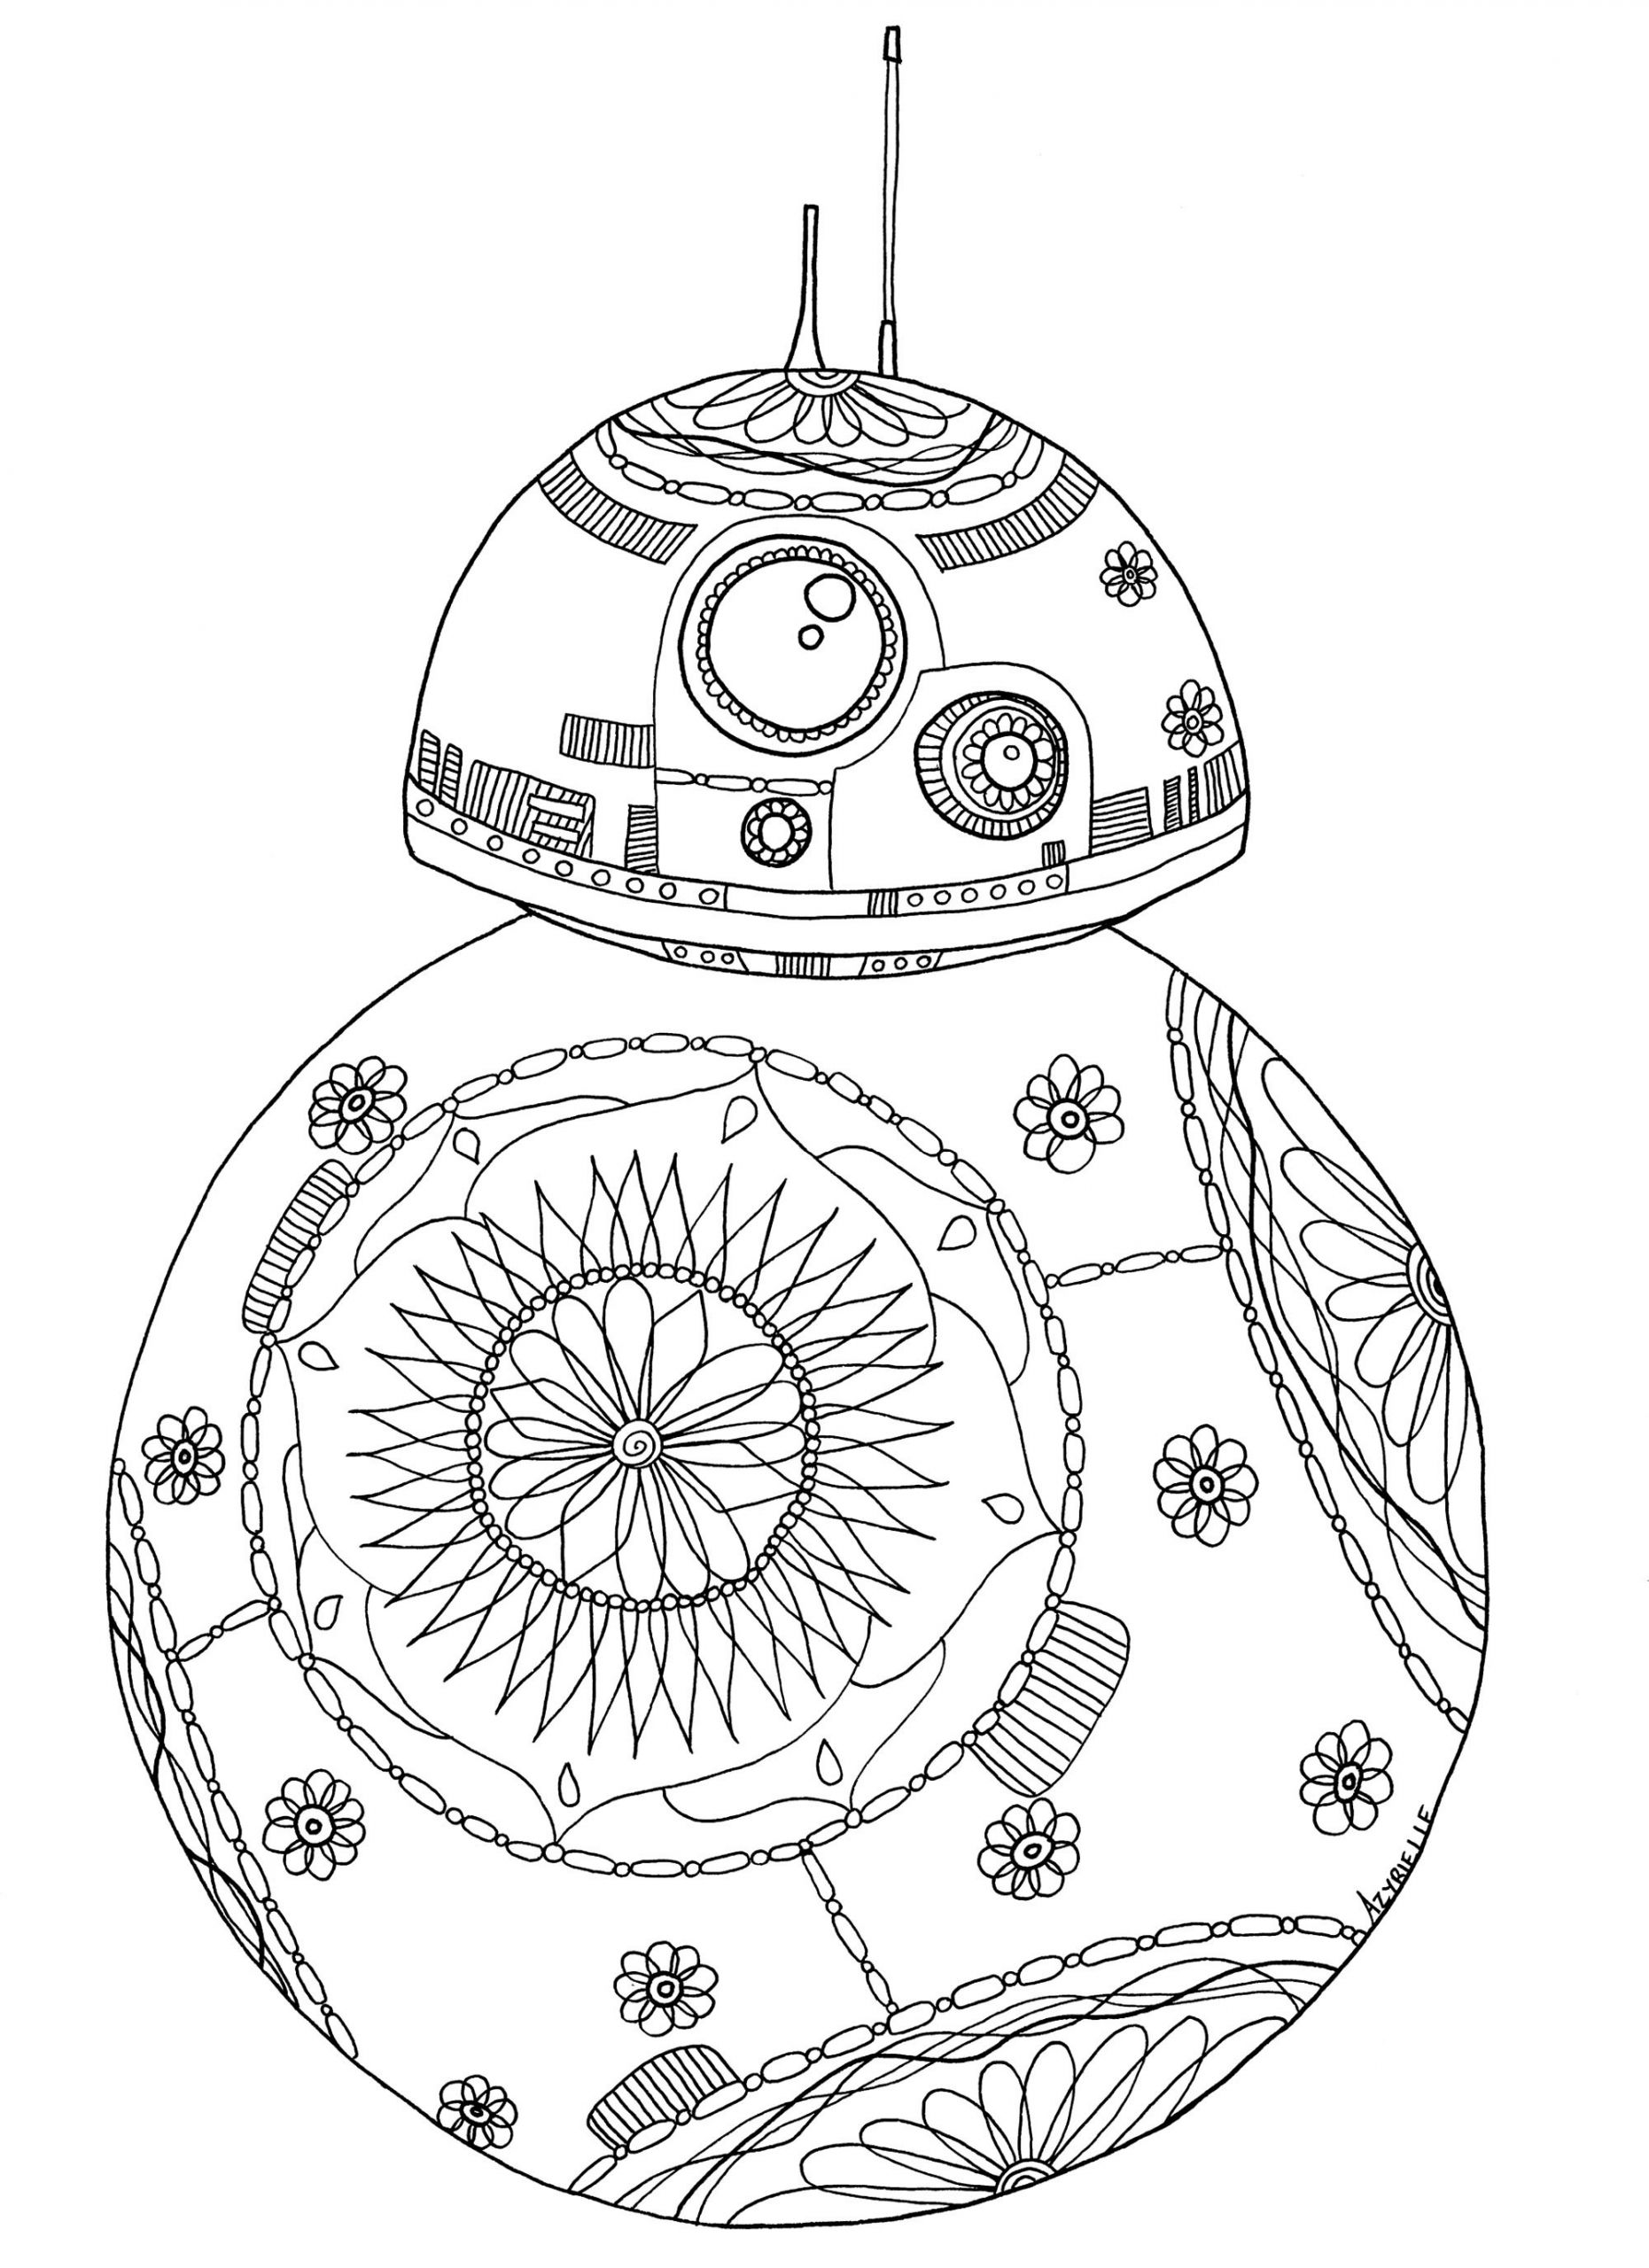 Star Wars Adult Coloring Pages
 Star wars Coloring Pages for Adults